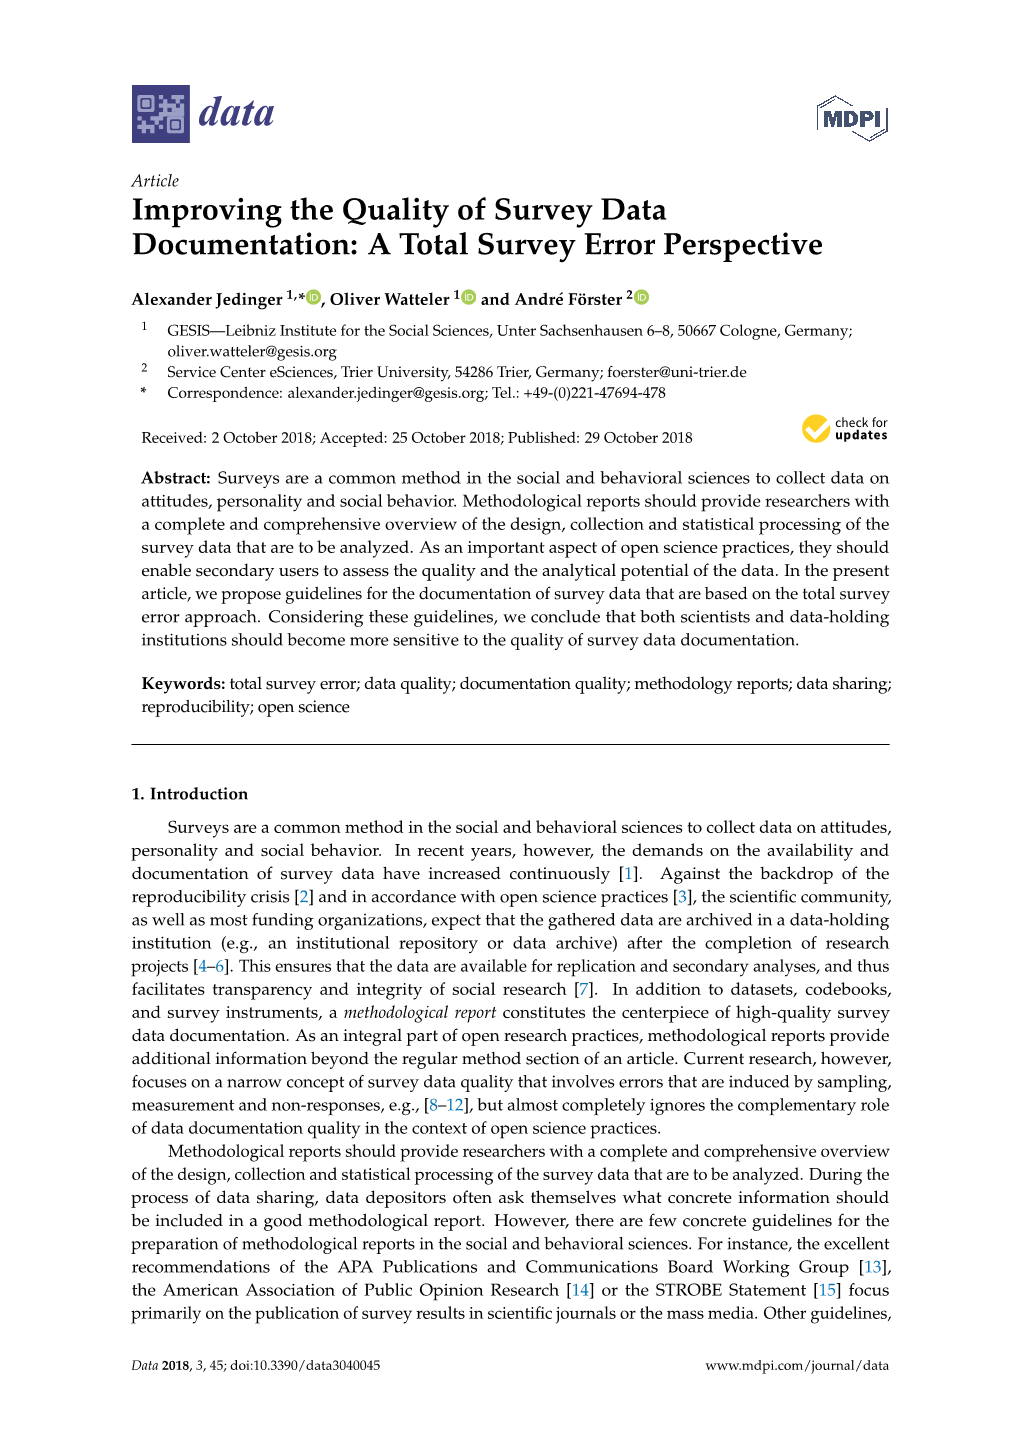 Improving the Quality of Survey Data Documentation: a Total Survey Error Perspective